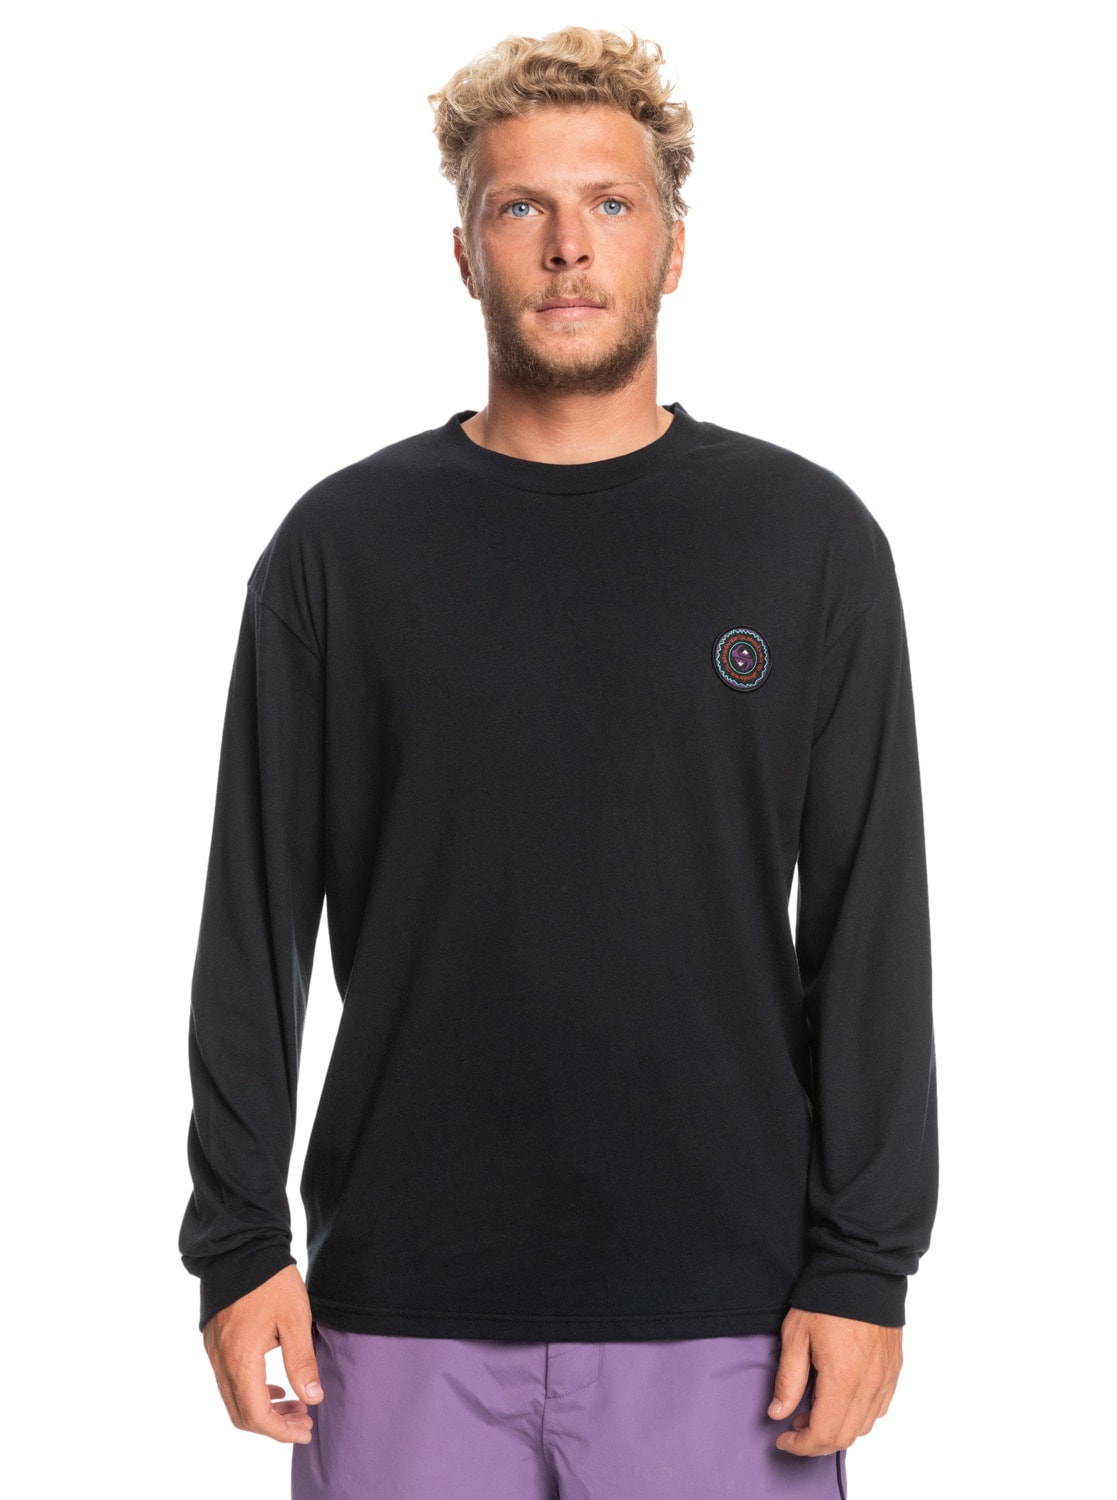 quiksilver -  Funktionsshirt "Stribe"